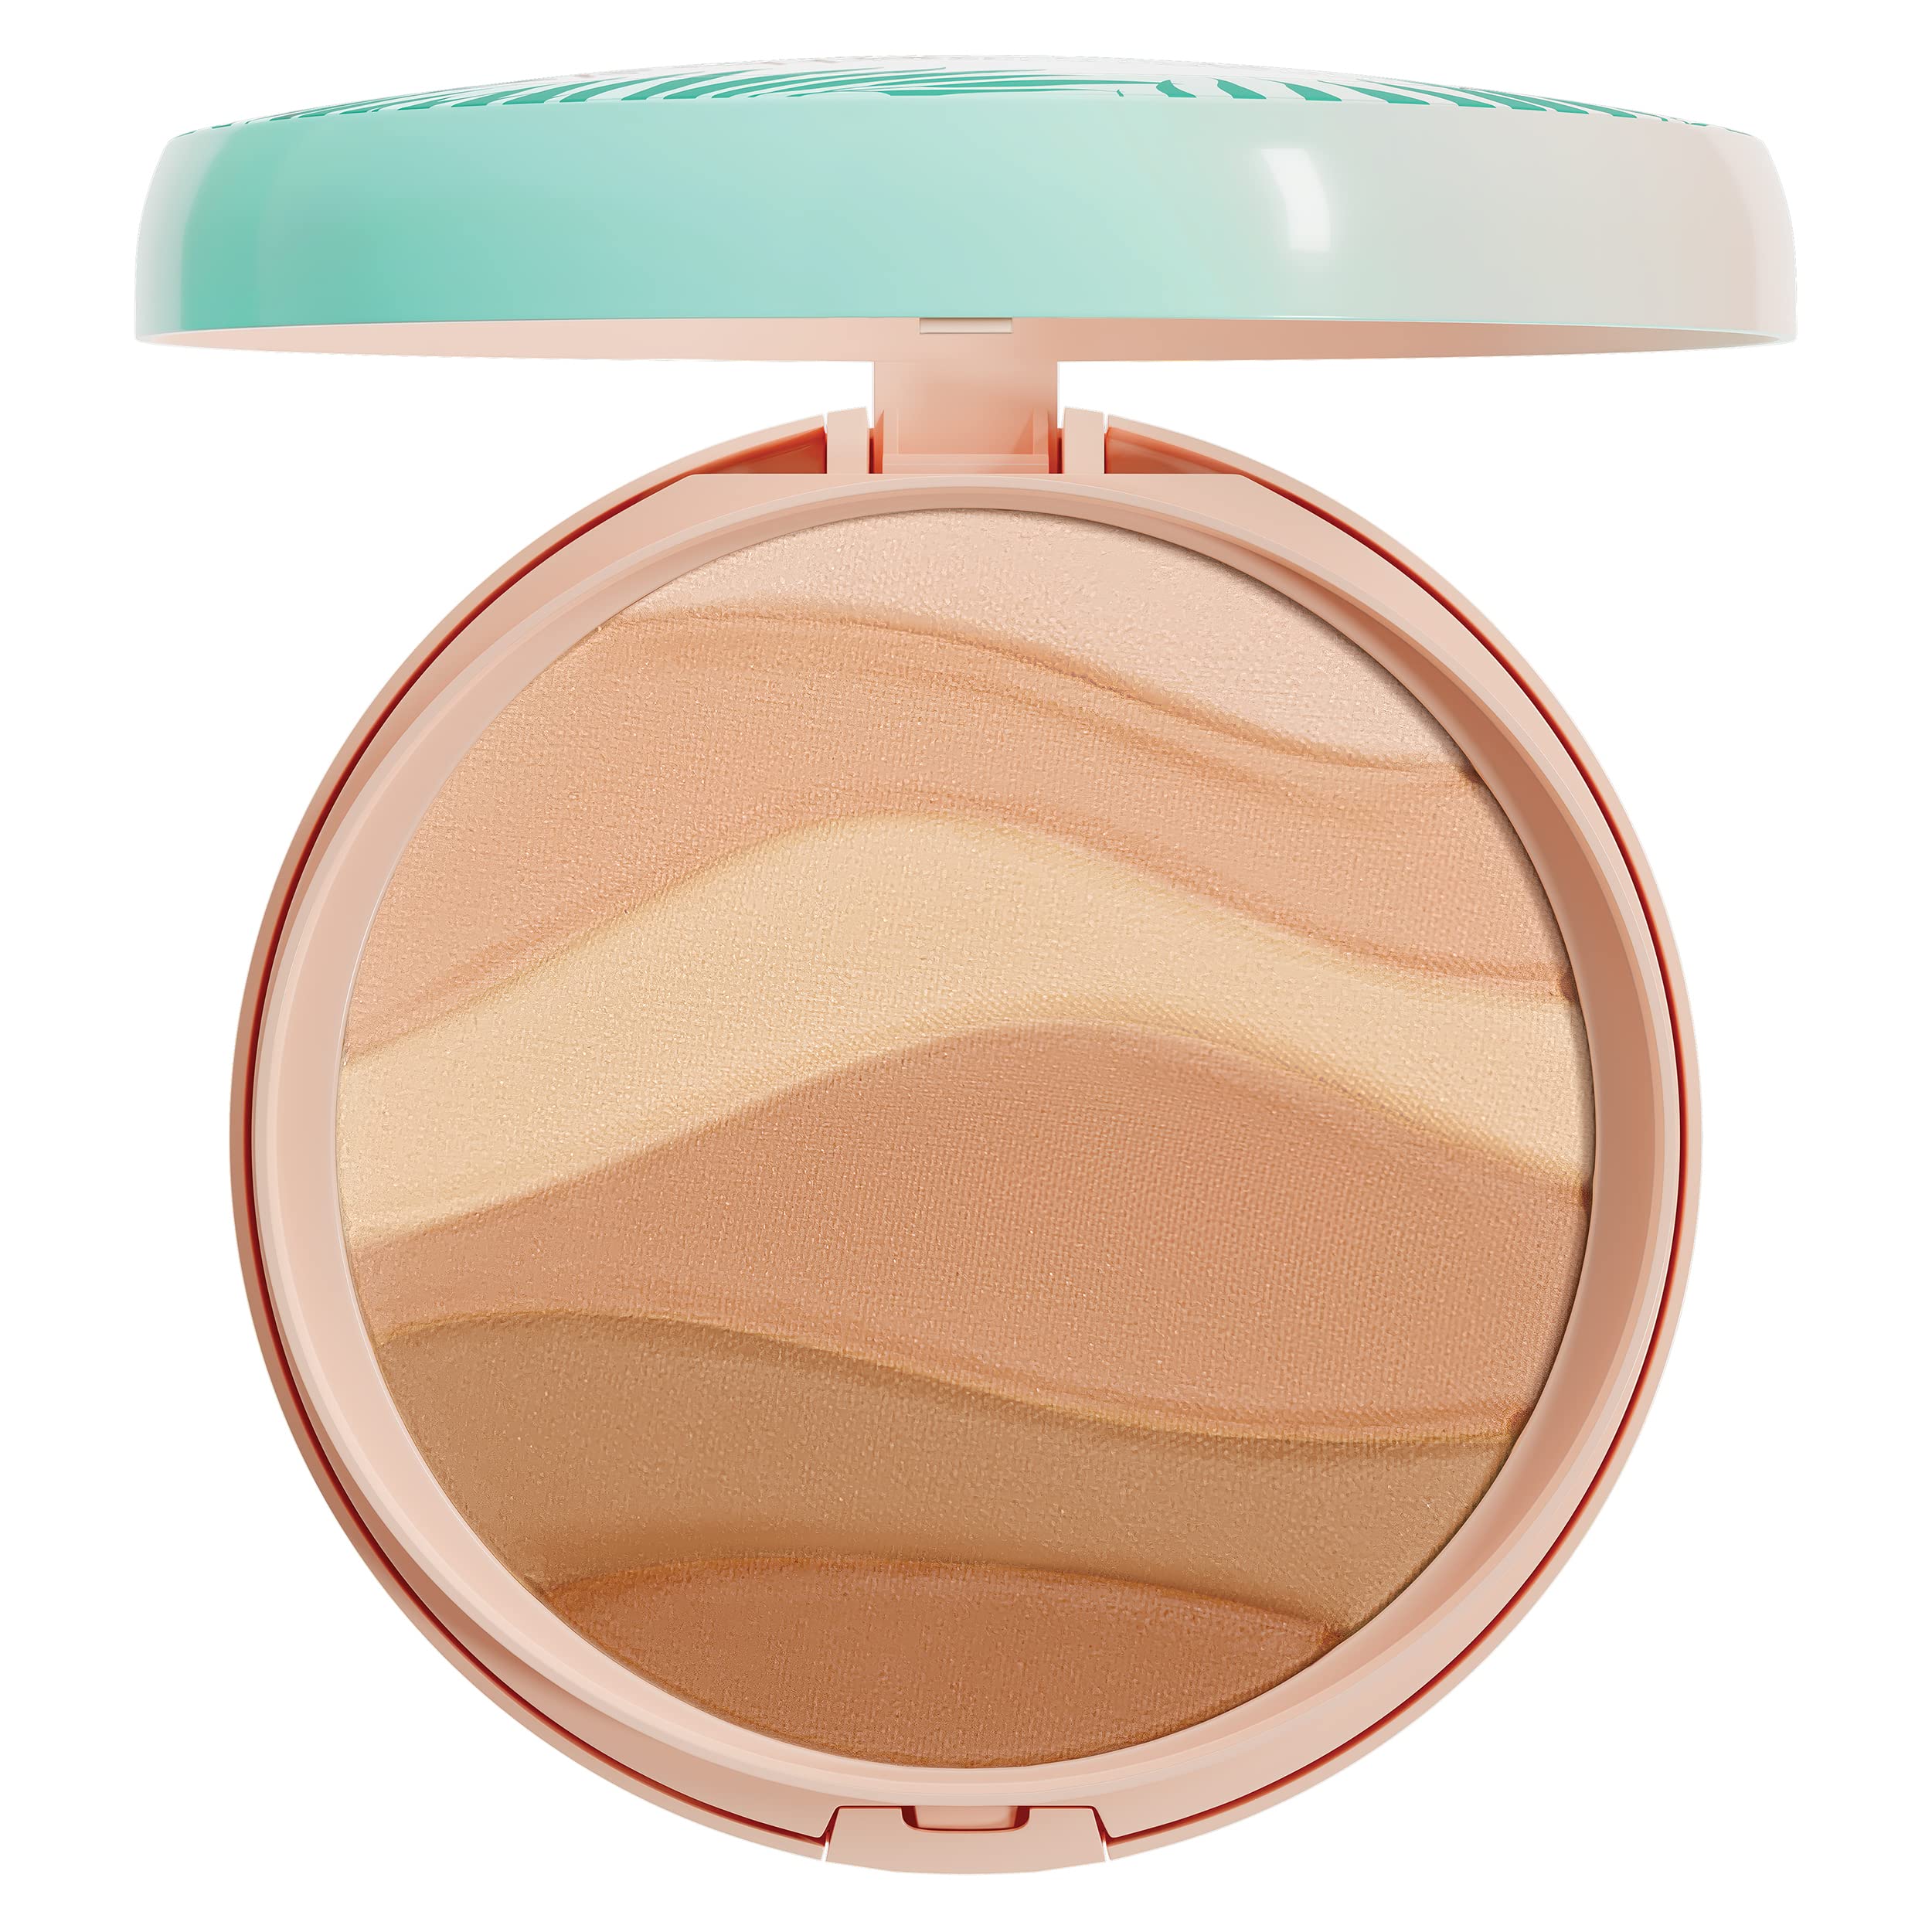 Physicians Formula Butter Believe it! Pressed Powder Creamy Natural | Dermatologist Tested, Clinicially Tested